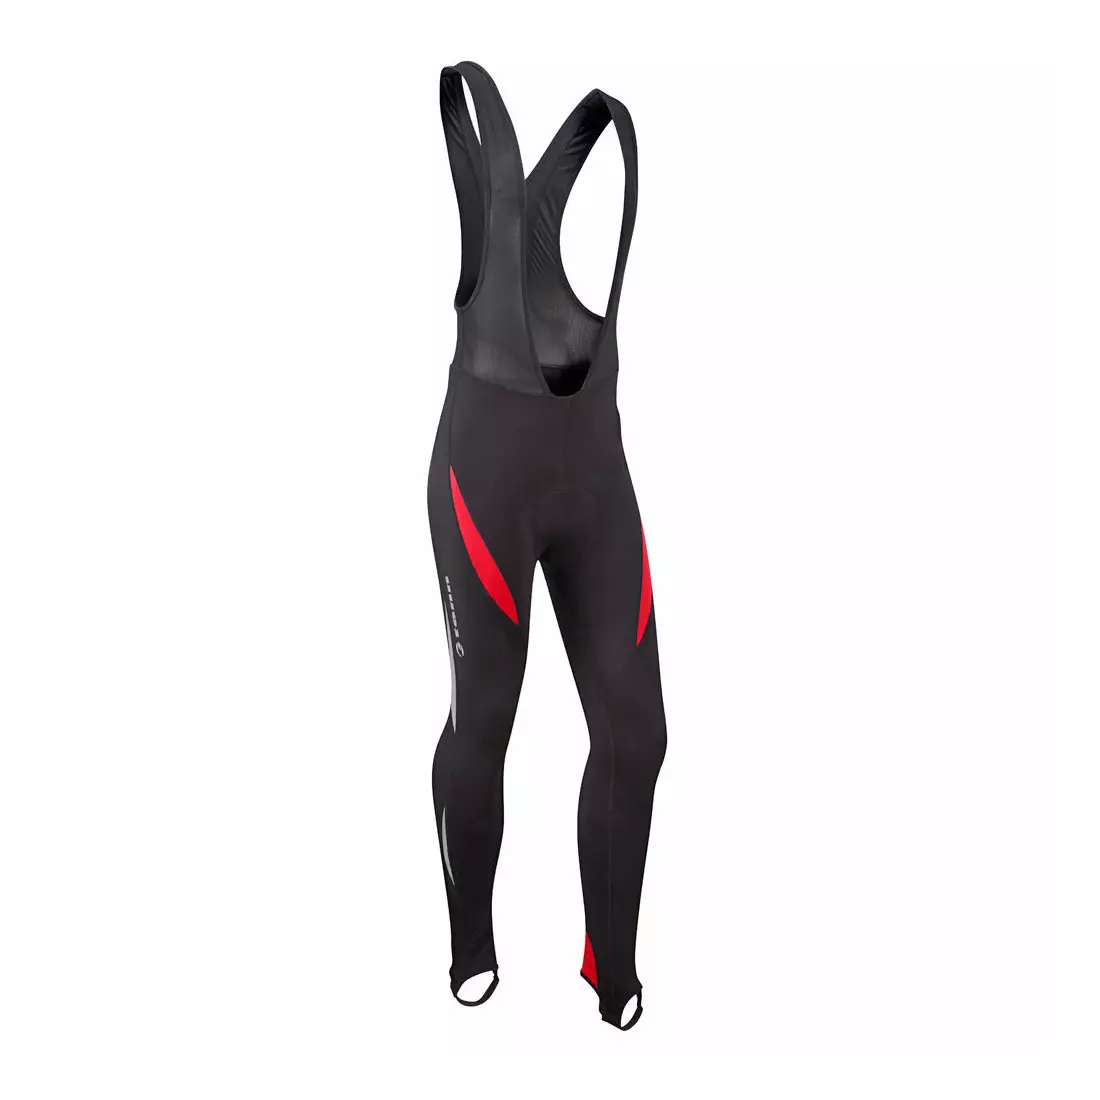 TENN OUTDOORS LAZER insulated bib shorts, black and red